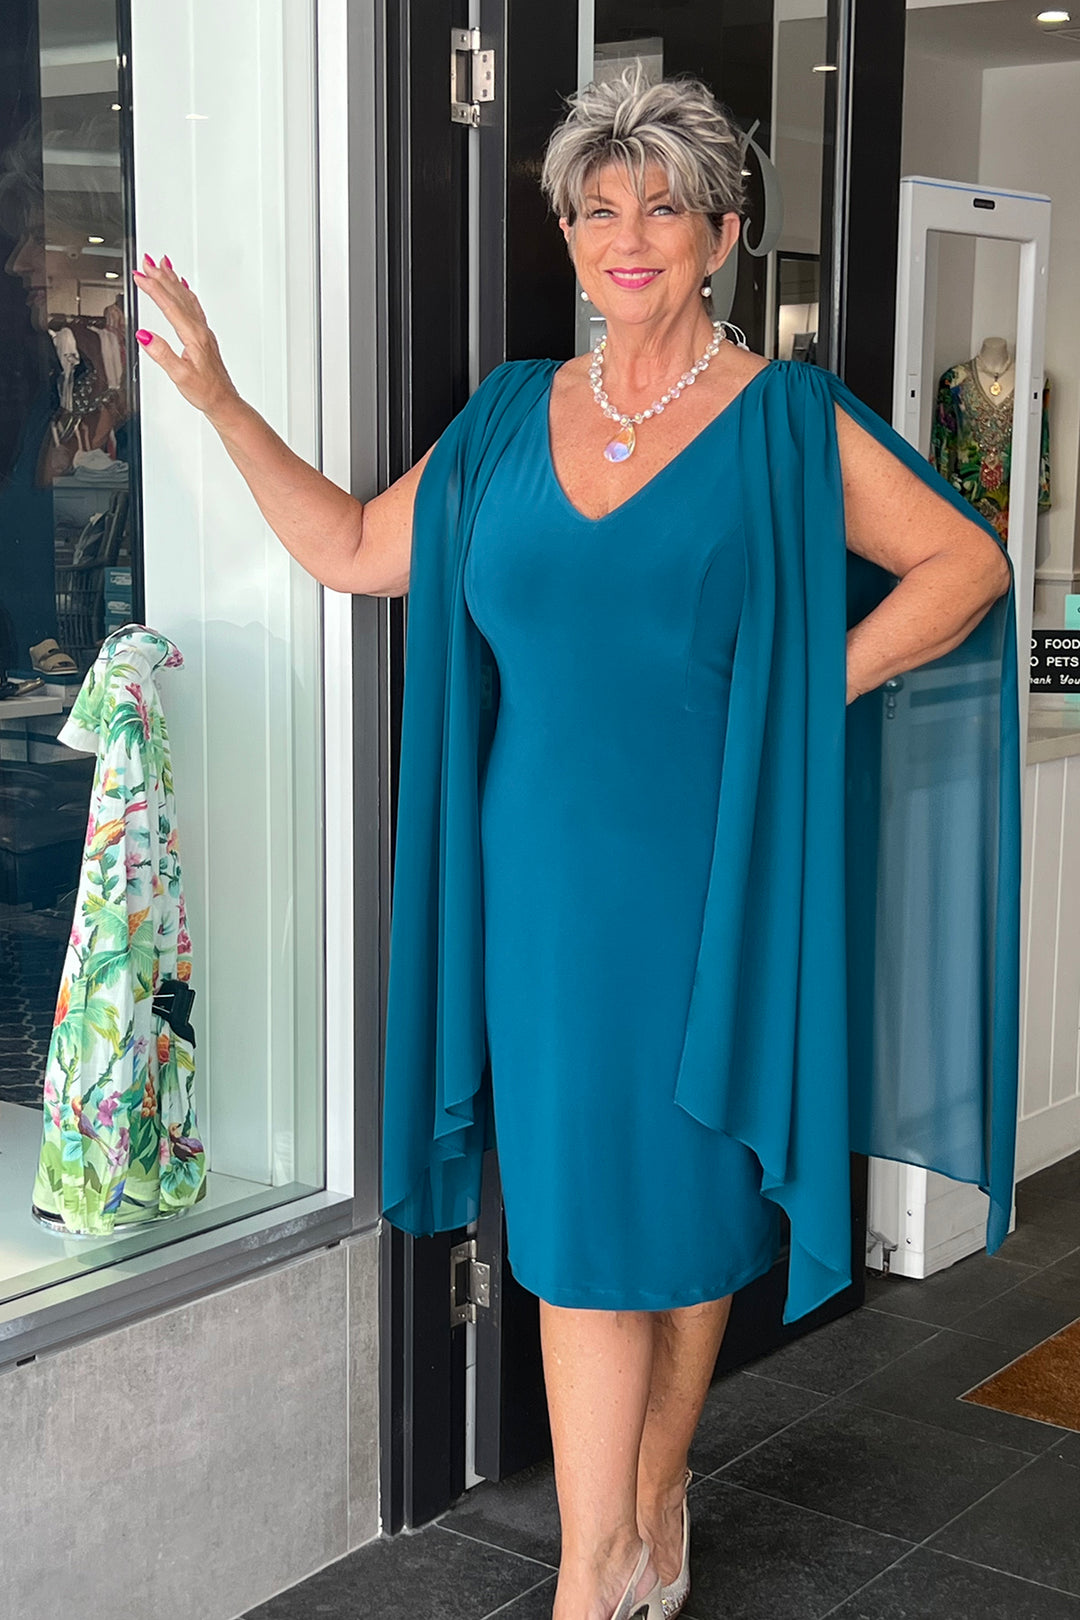 Lady wearing a blue evening gown, knee length with draping sleeves from Pizazz Boutique Nelson Bay